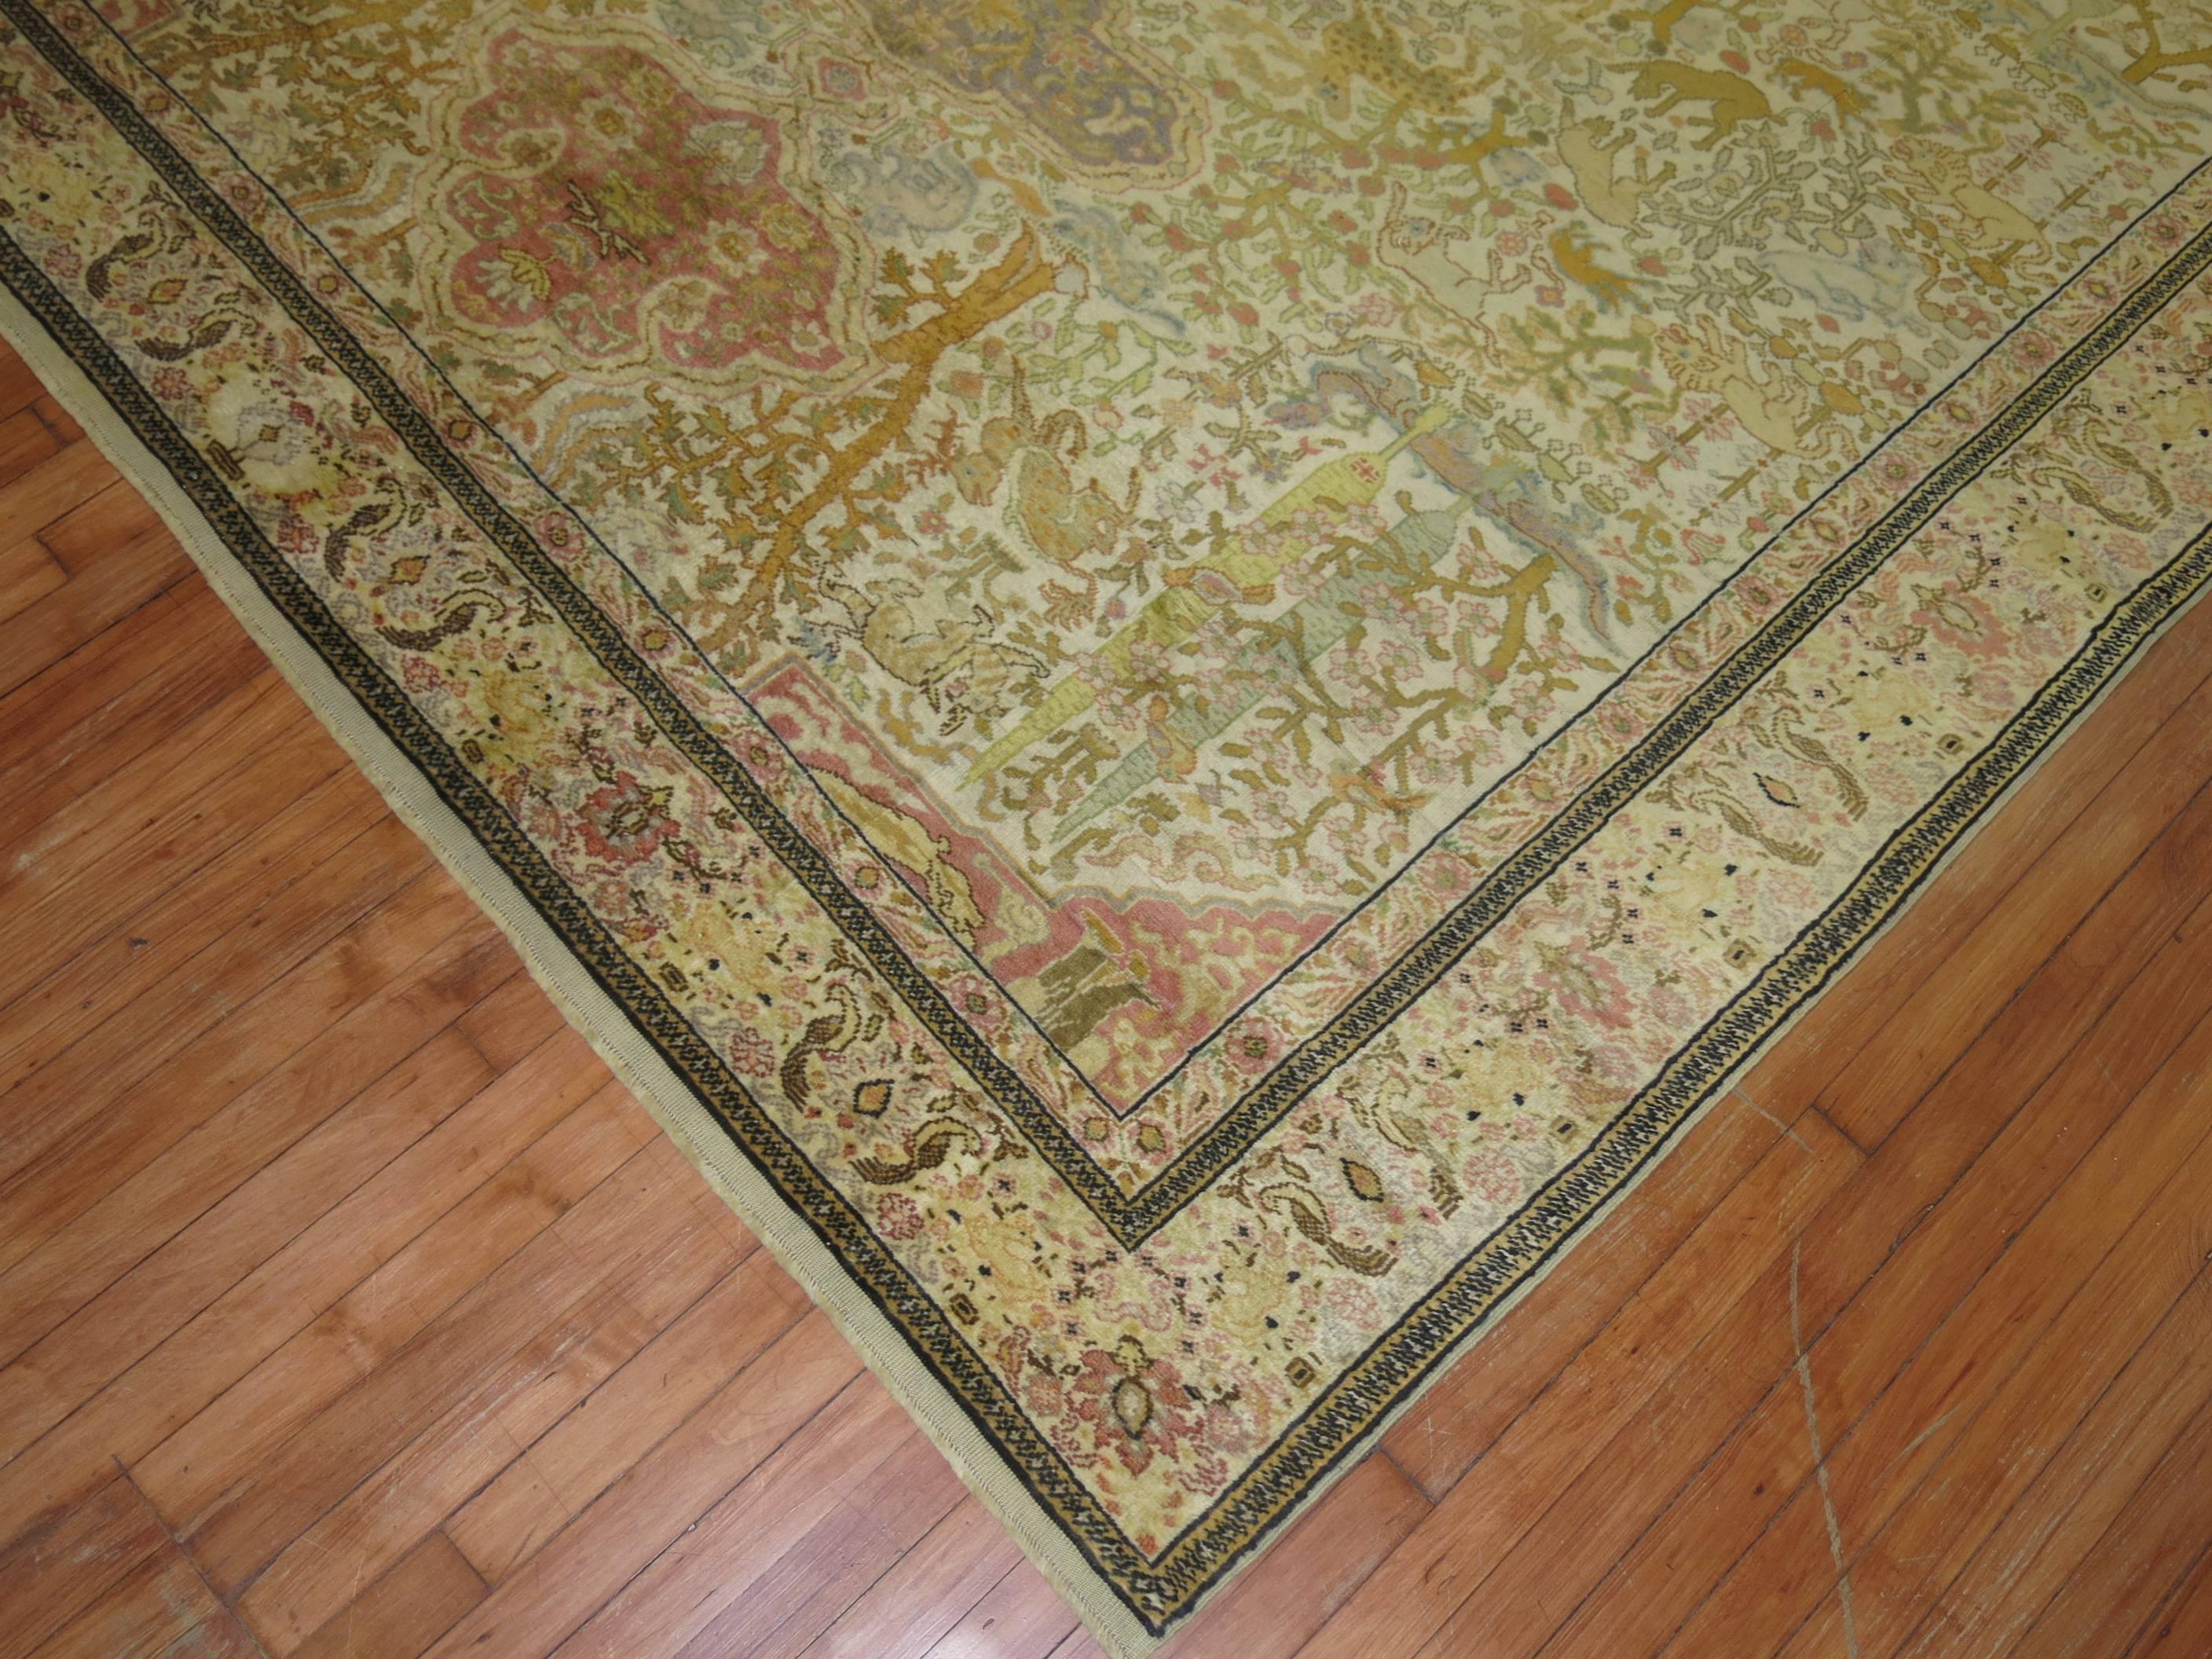 Square size pictorial Turkish sivas carpet from the early 20th century.